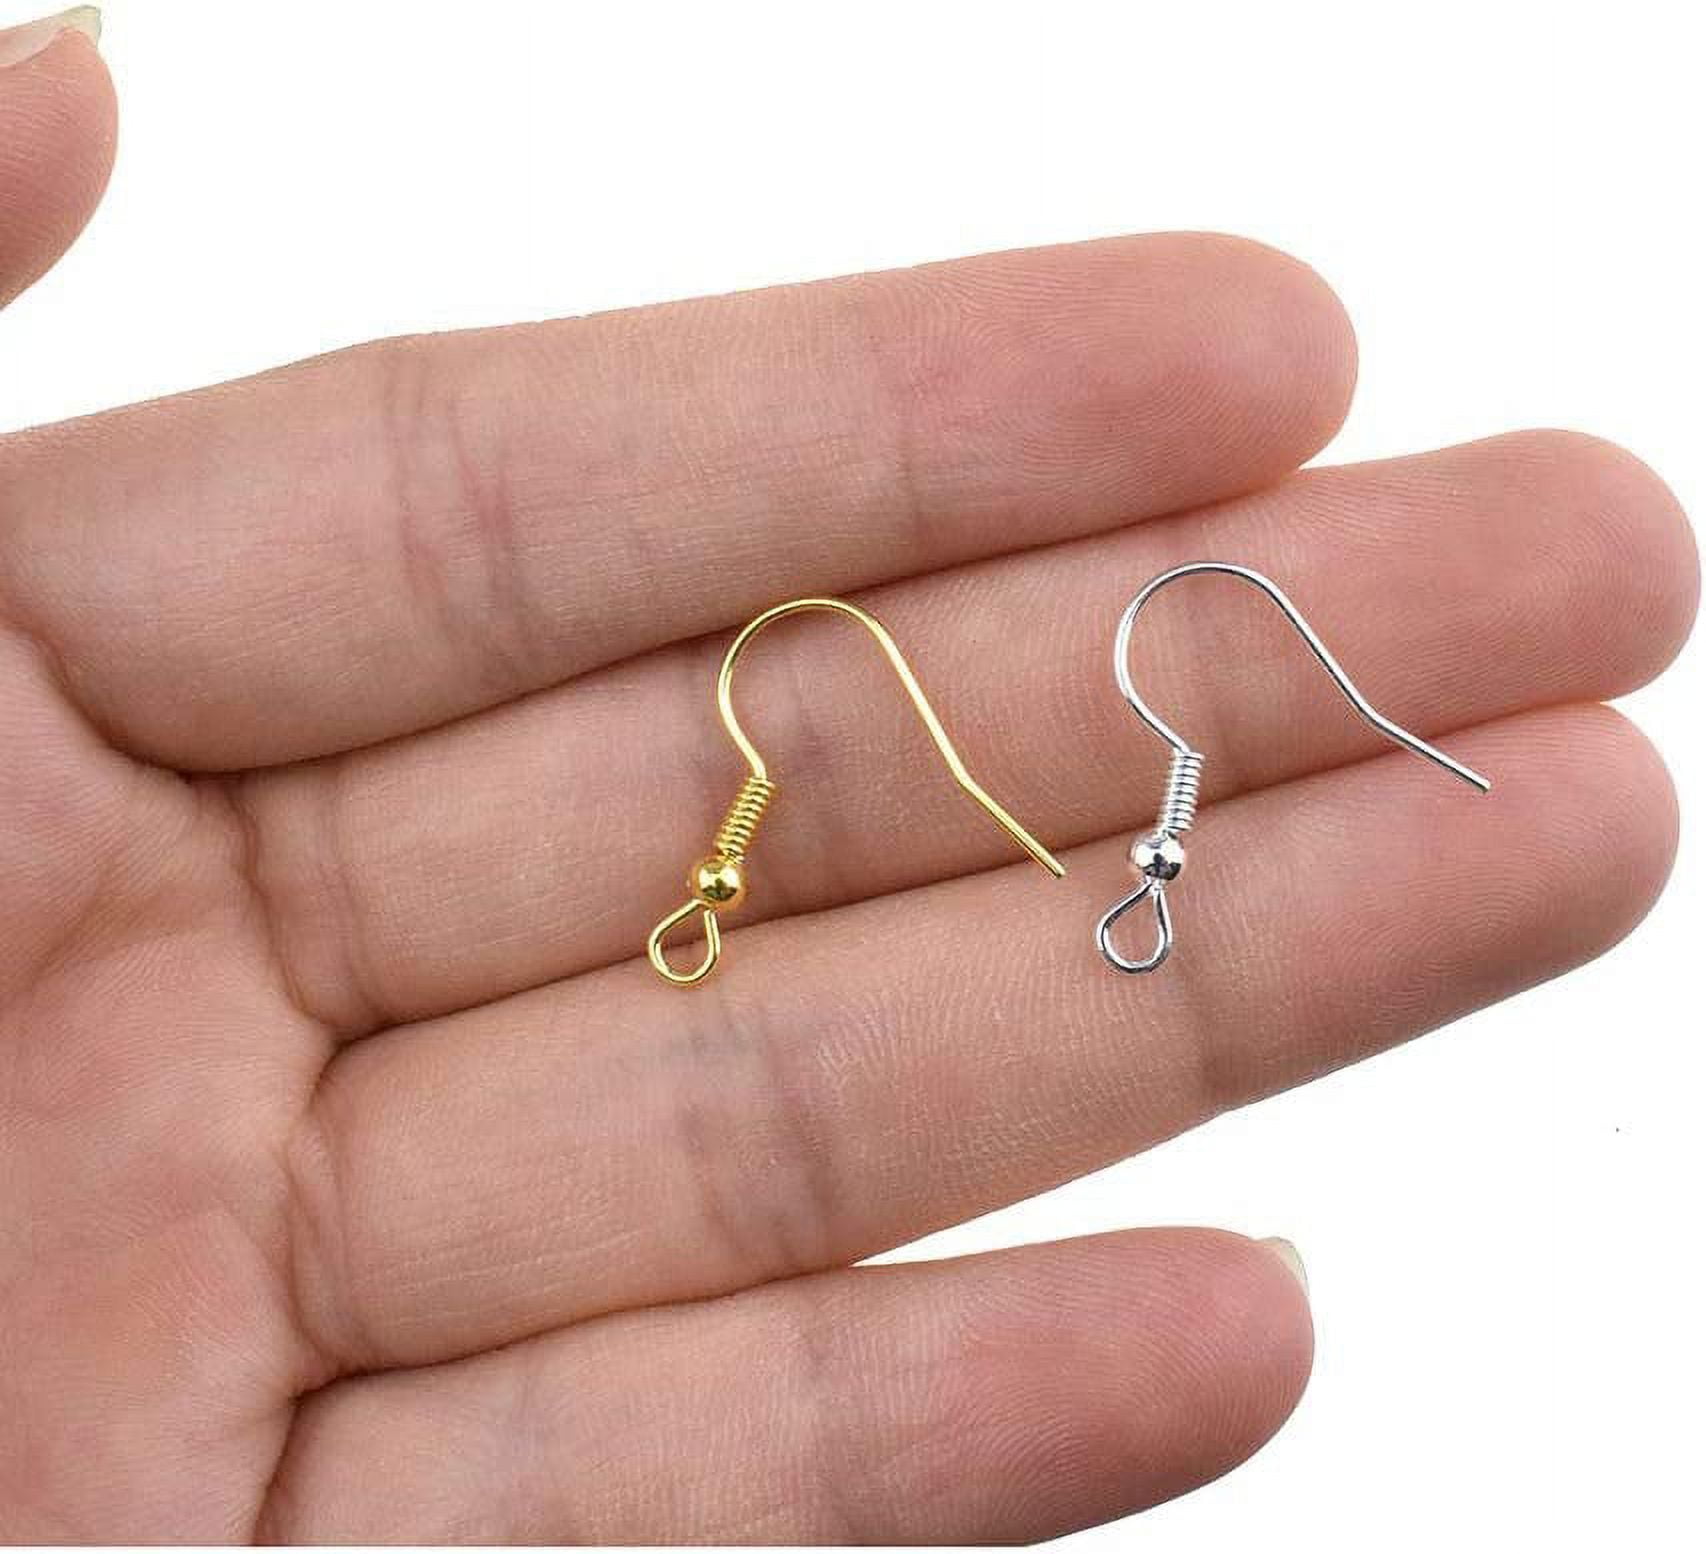 Earring Fish Hooks Hypoallergenic 20x20mm Wire with Ball and Coil No  Irritate Tarnish for DIY Craft Jewelry Making Surgical Steel Gold Silver  Assortment with Clear Rubber Earring Back 200pcs 